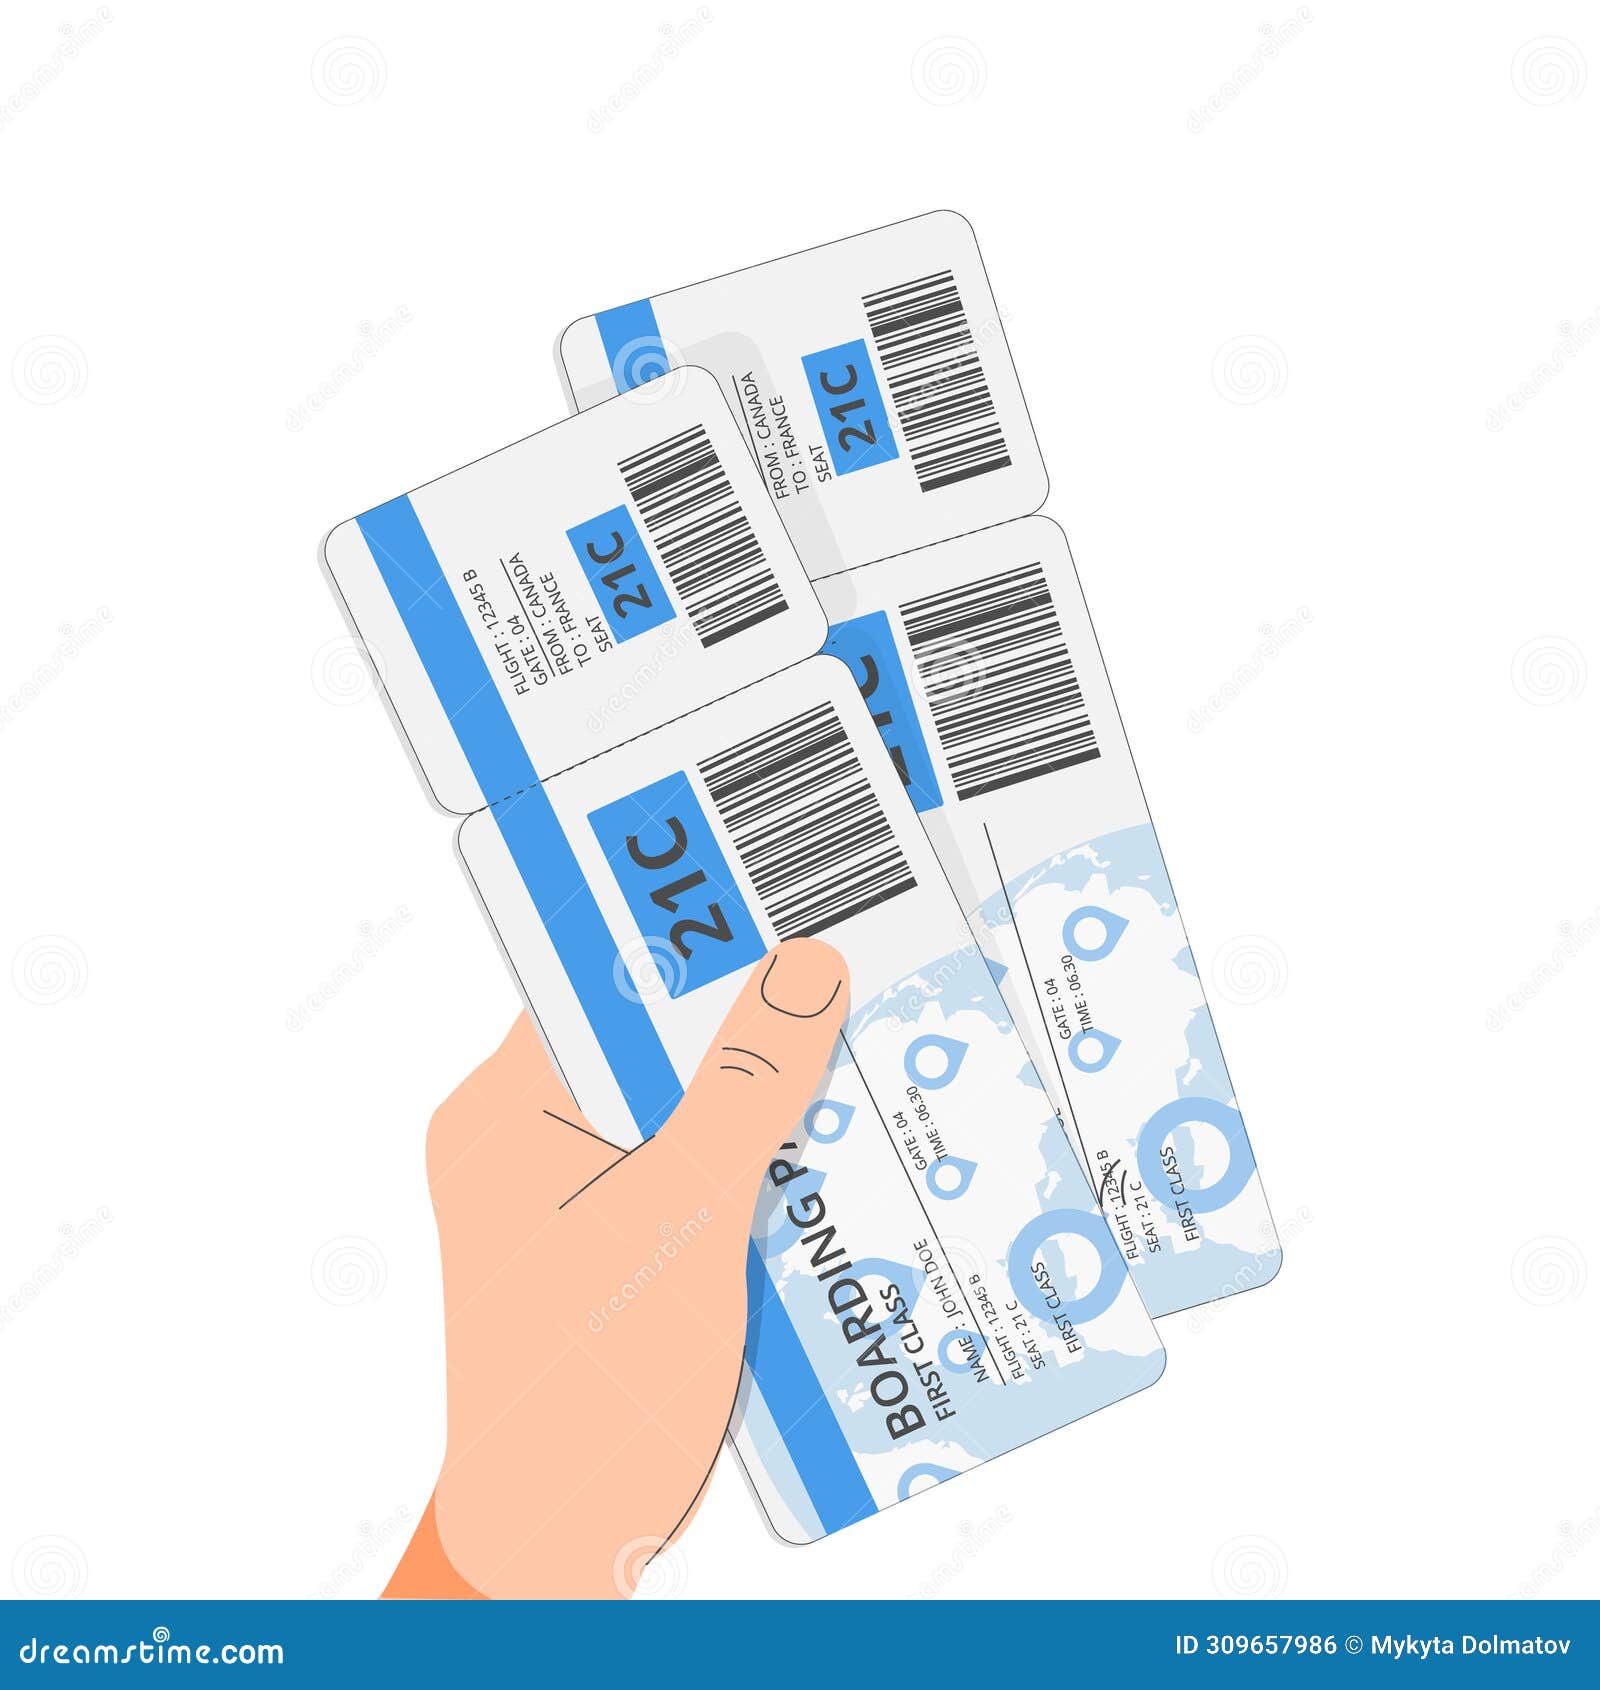 two air flight tickets, boarding passes in hand. tourist, passenger holding checkin papers for airline, airplane travel